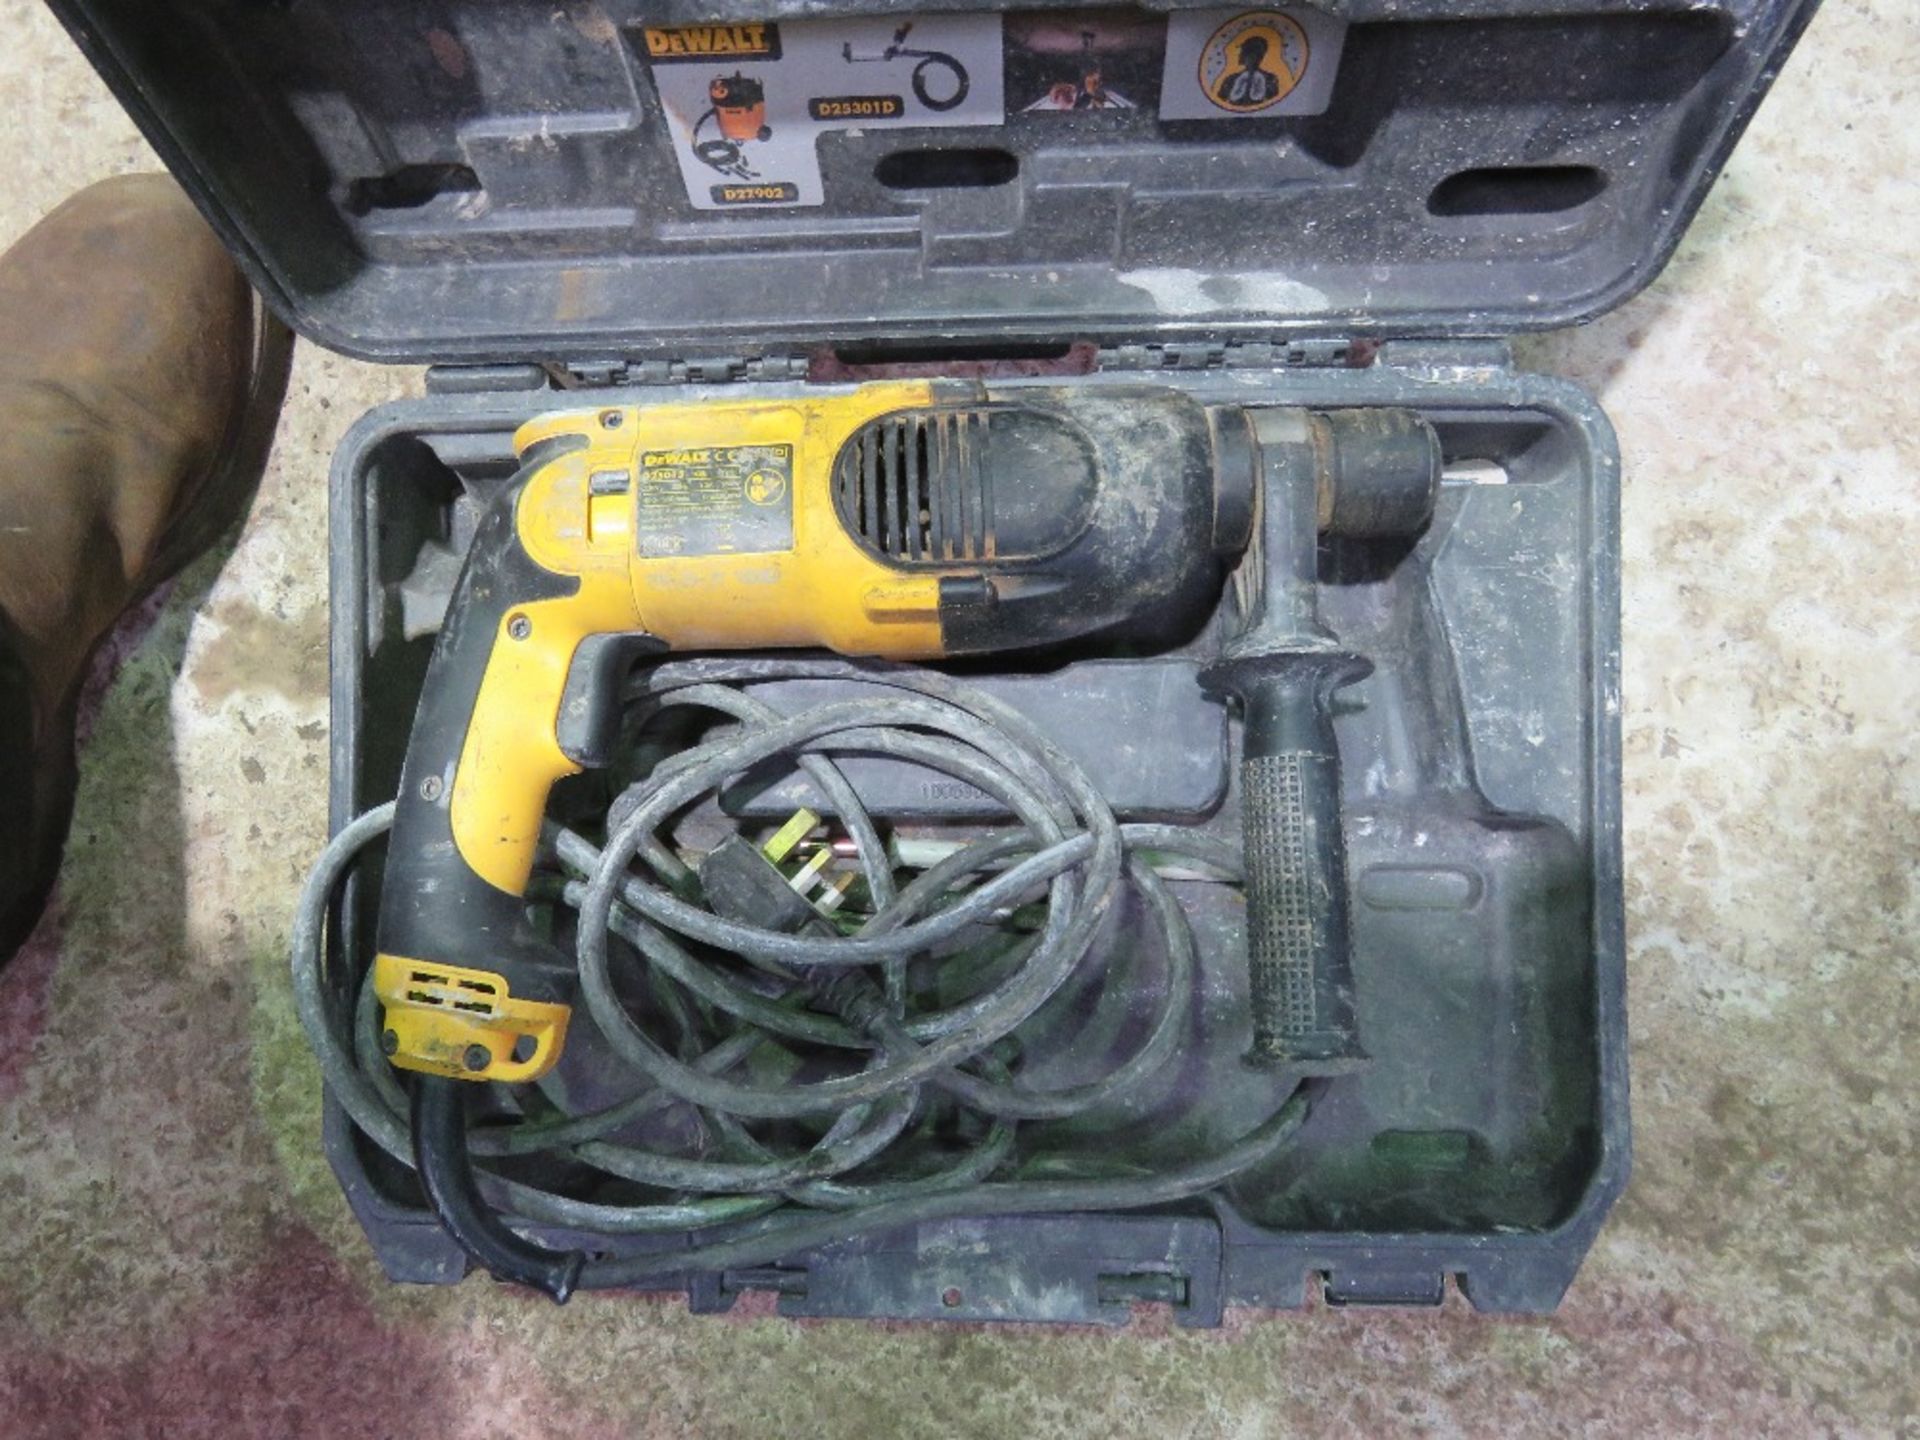 JCB HM25 HYDRAULIC BREAKER GUN PLUS A DEWALT 110VOLT DRILL.......THIS LOT IS SOLD UNDER THE AUCTIONE - Image 4 of 4